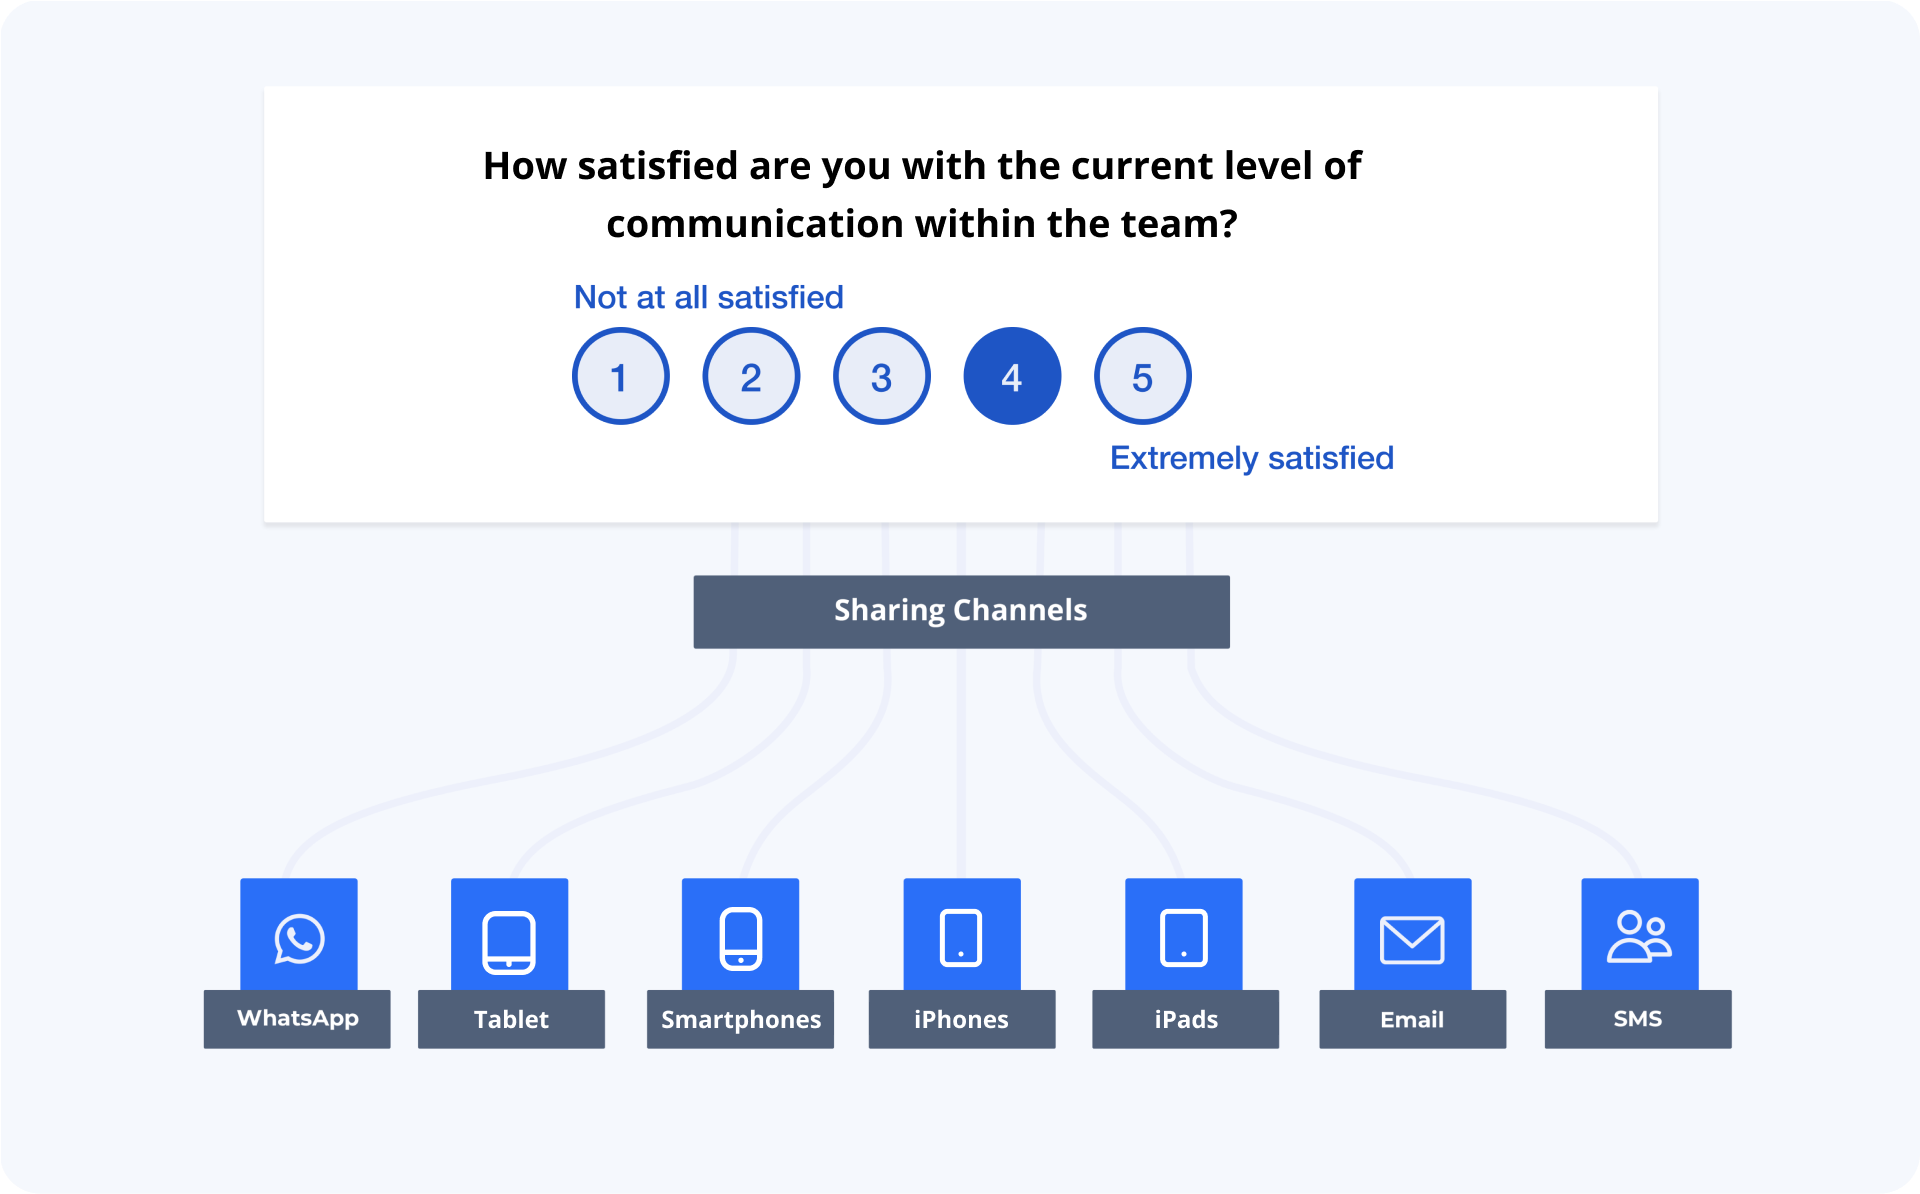  the image is of the different channels that can accessed through the employee feedback software created by SurveySenum, for example, WhatsApp, Email, SMS, etc. 